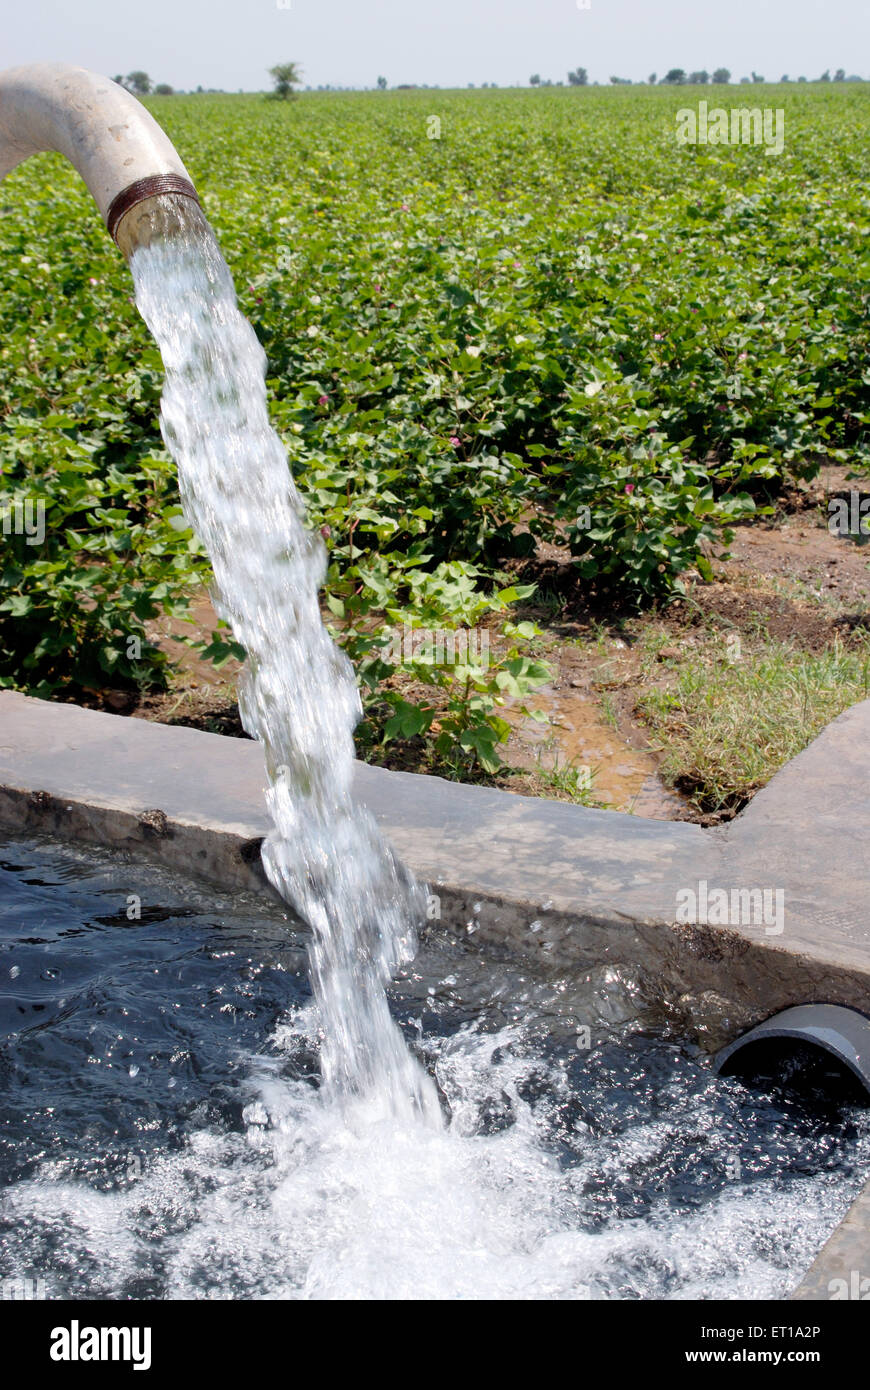 Water pouring from pipe at cotton plant field, Amreli, Gujarat, India Stock Photo